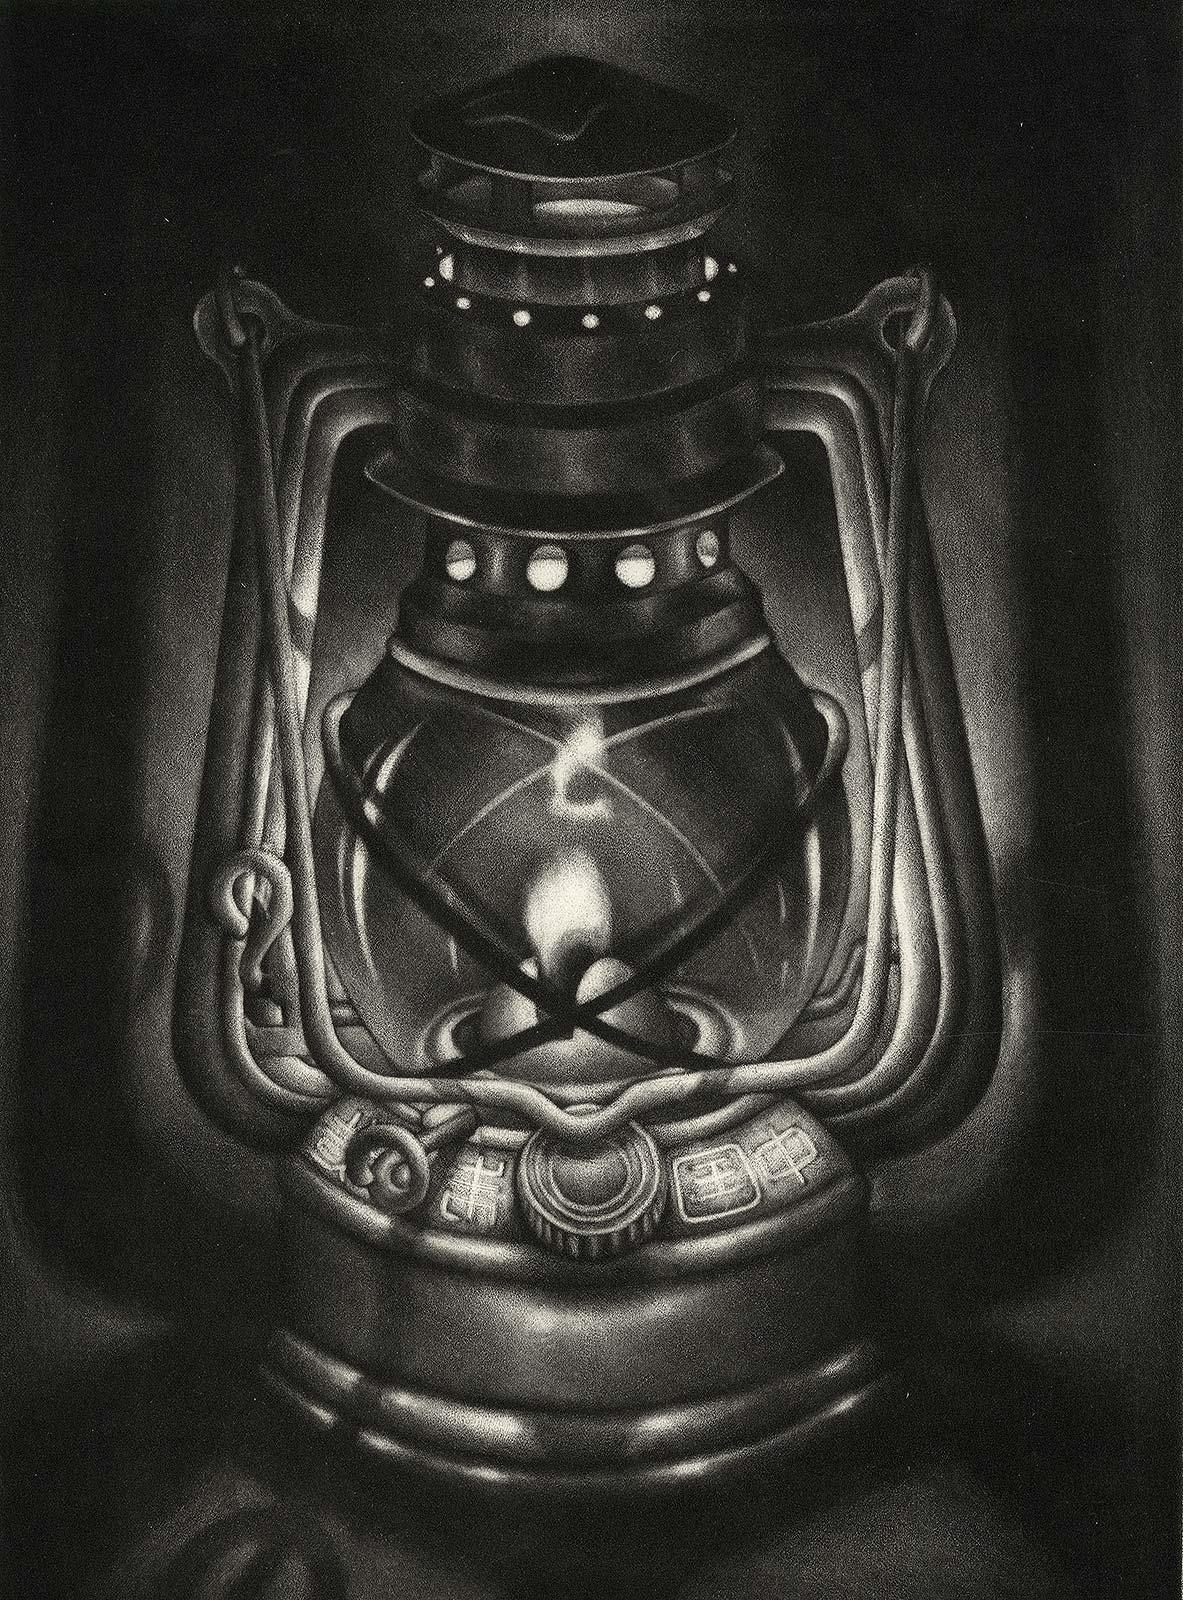 Made in China (A lantern with Chinese characters etched on the base) - Print by Carol Wax